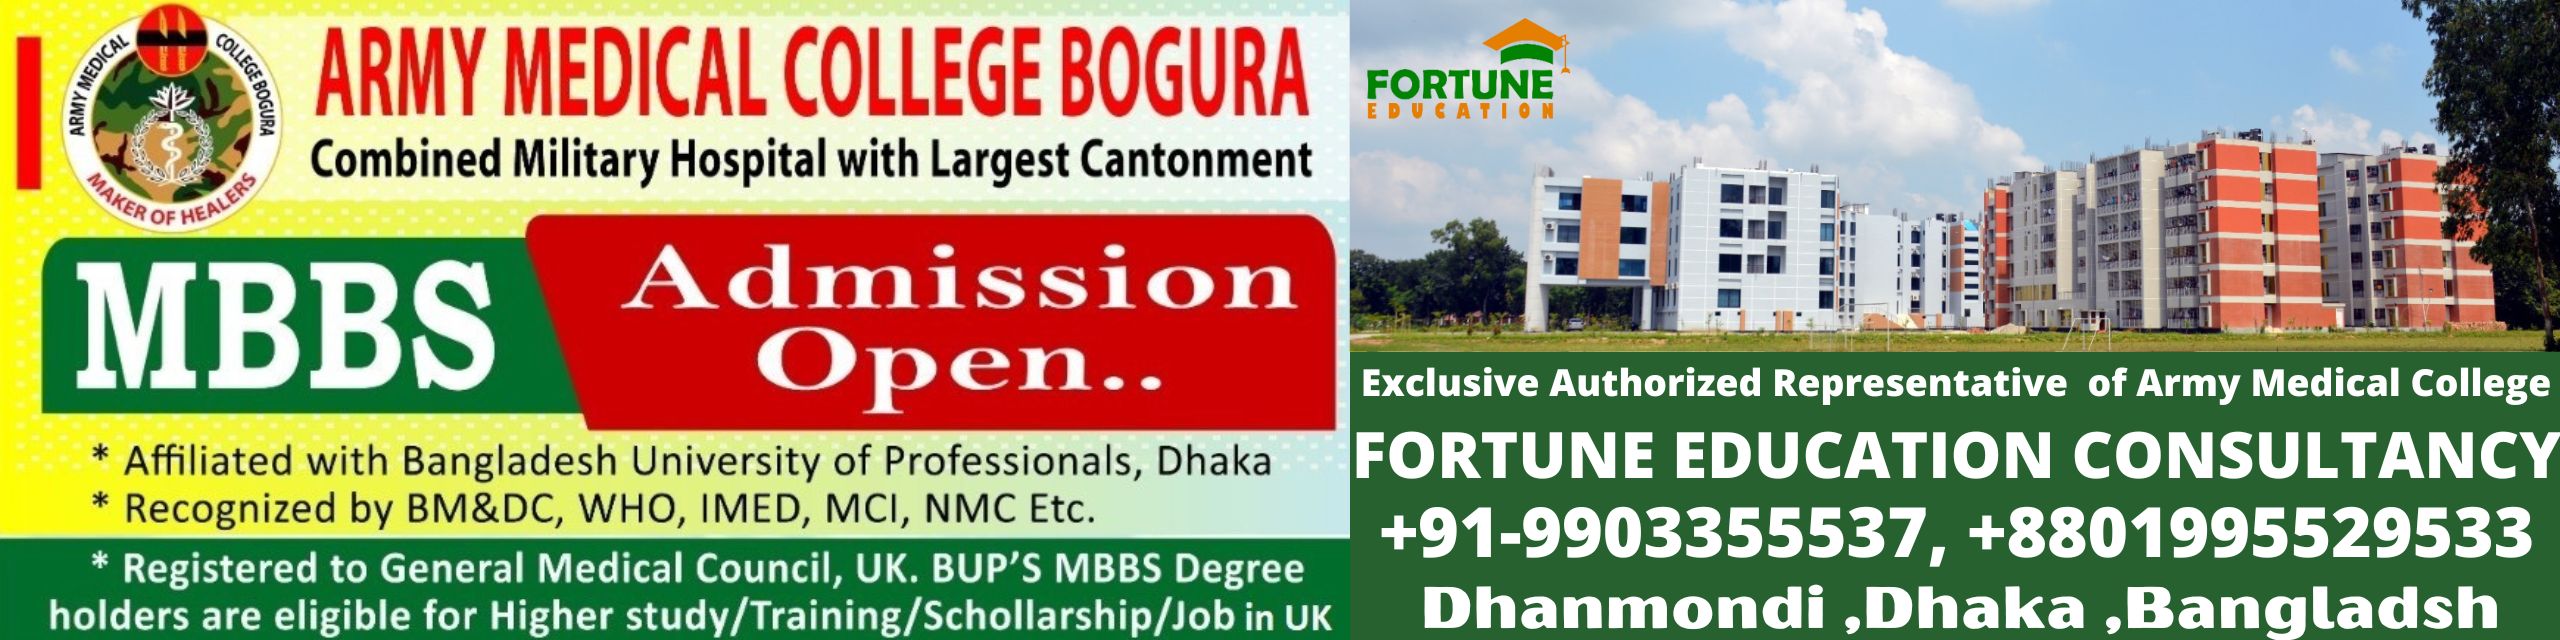 Fortune Education in Bangladesh